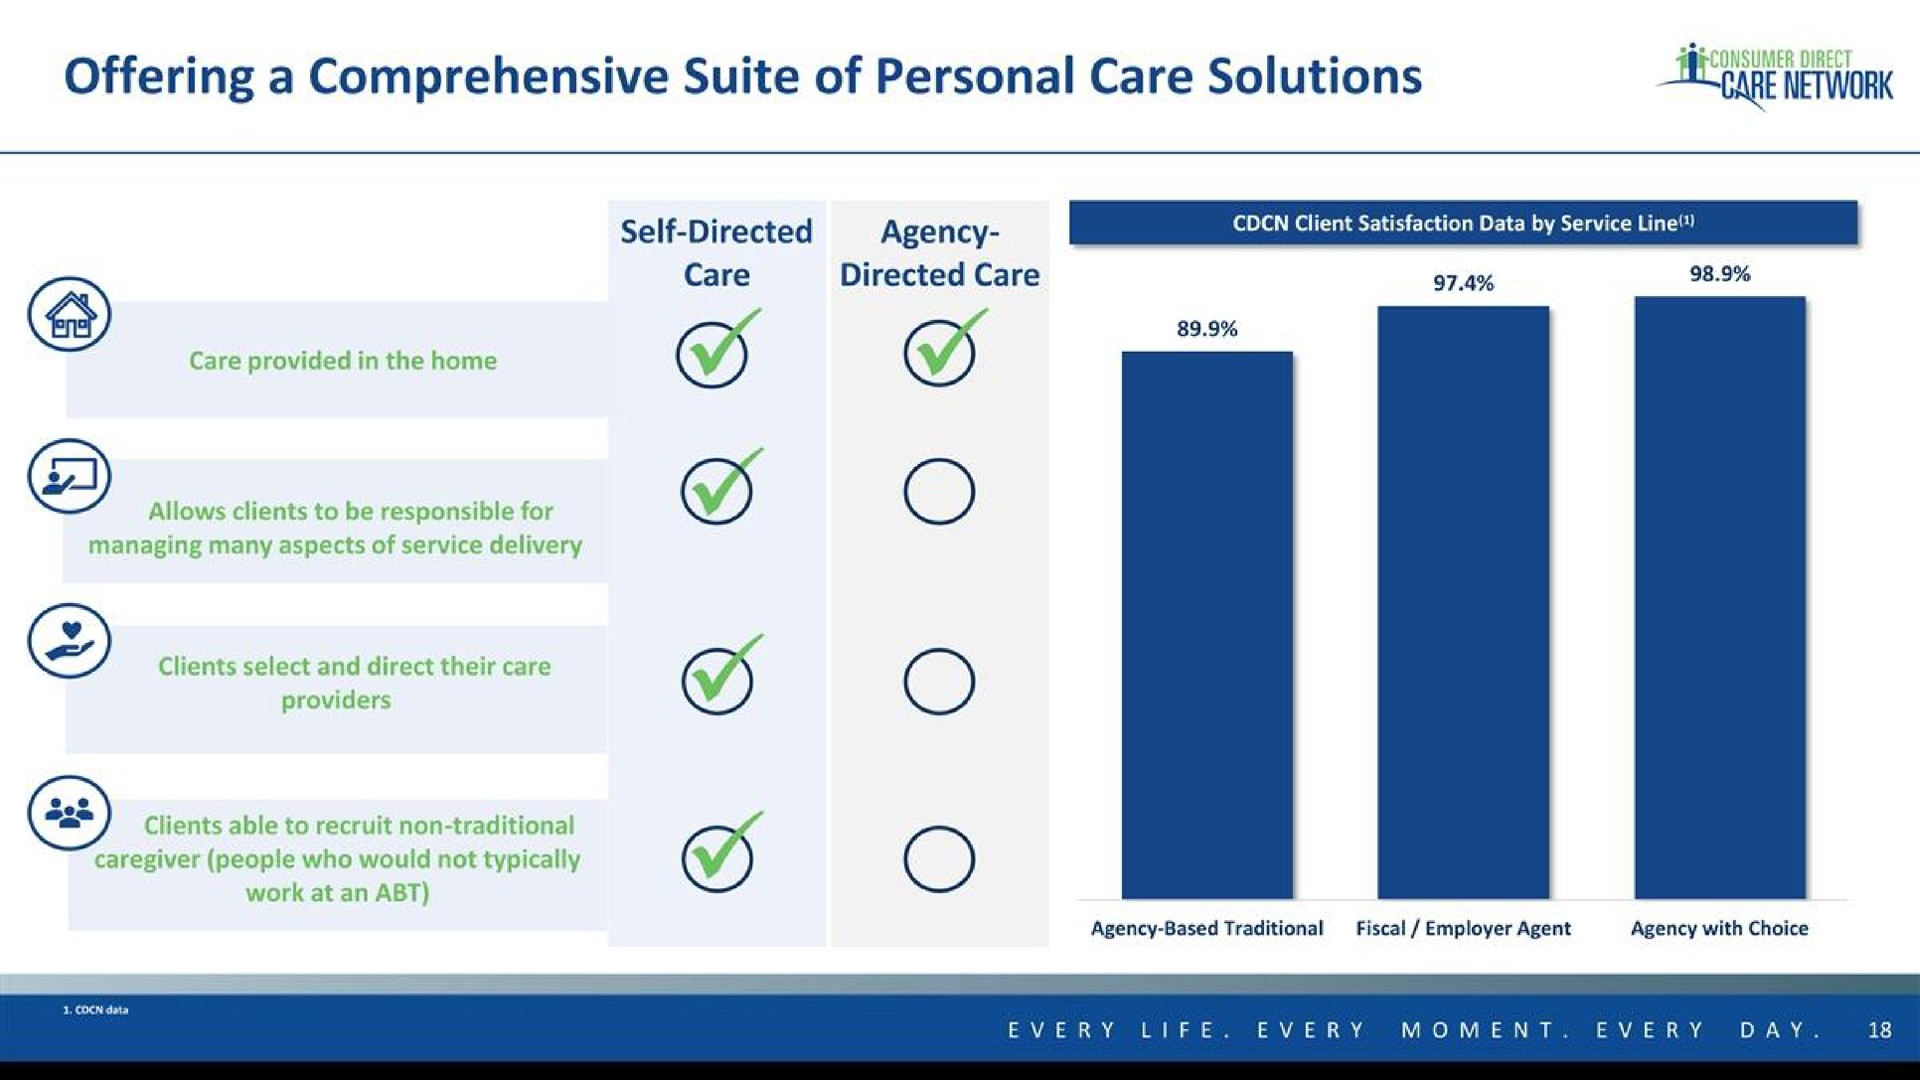 offering a comprehensive suite of personal care solutions a network | Consumer Direct Care Network